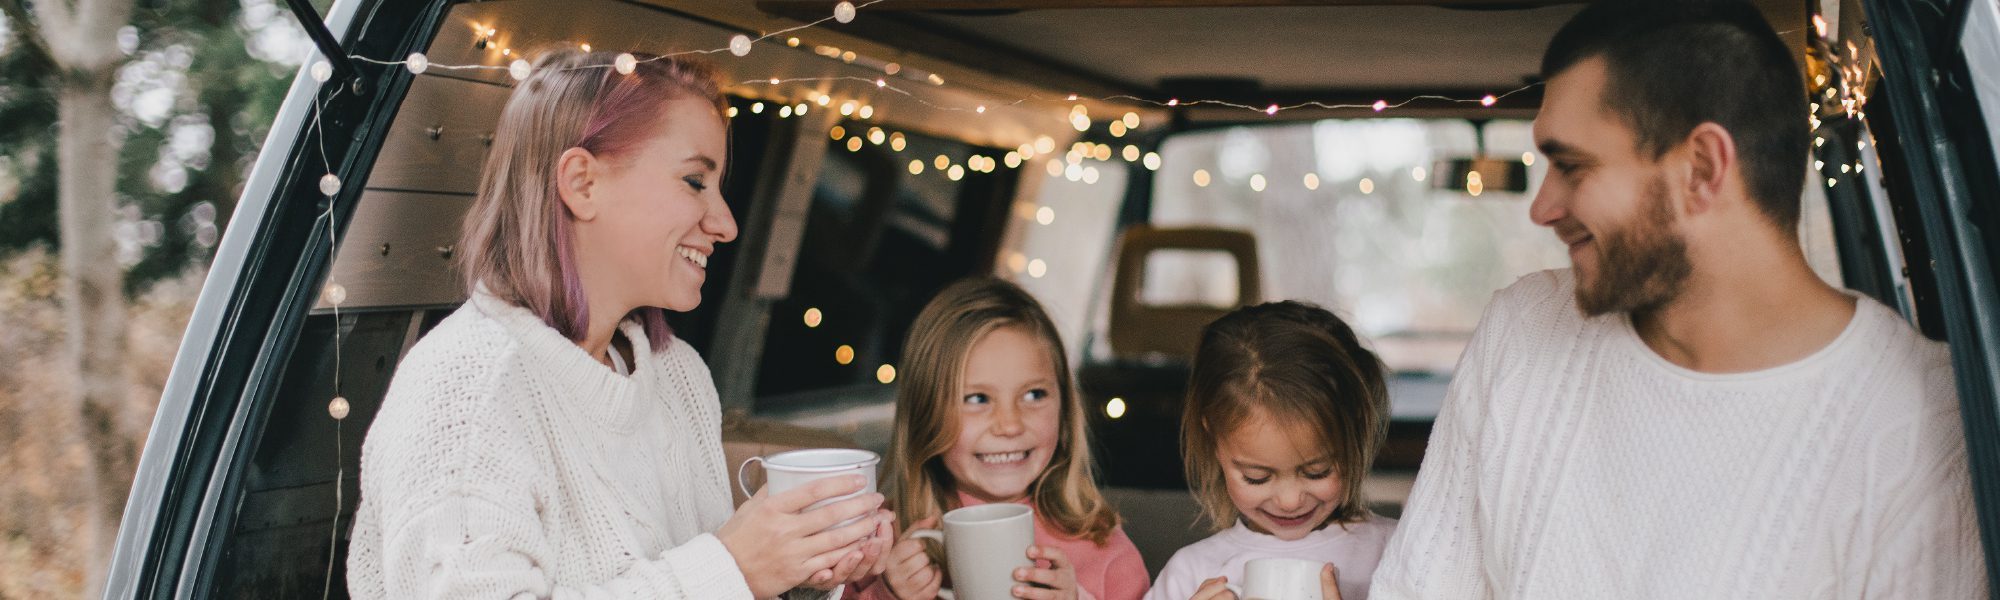 family in the back of a car with mugs and lights